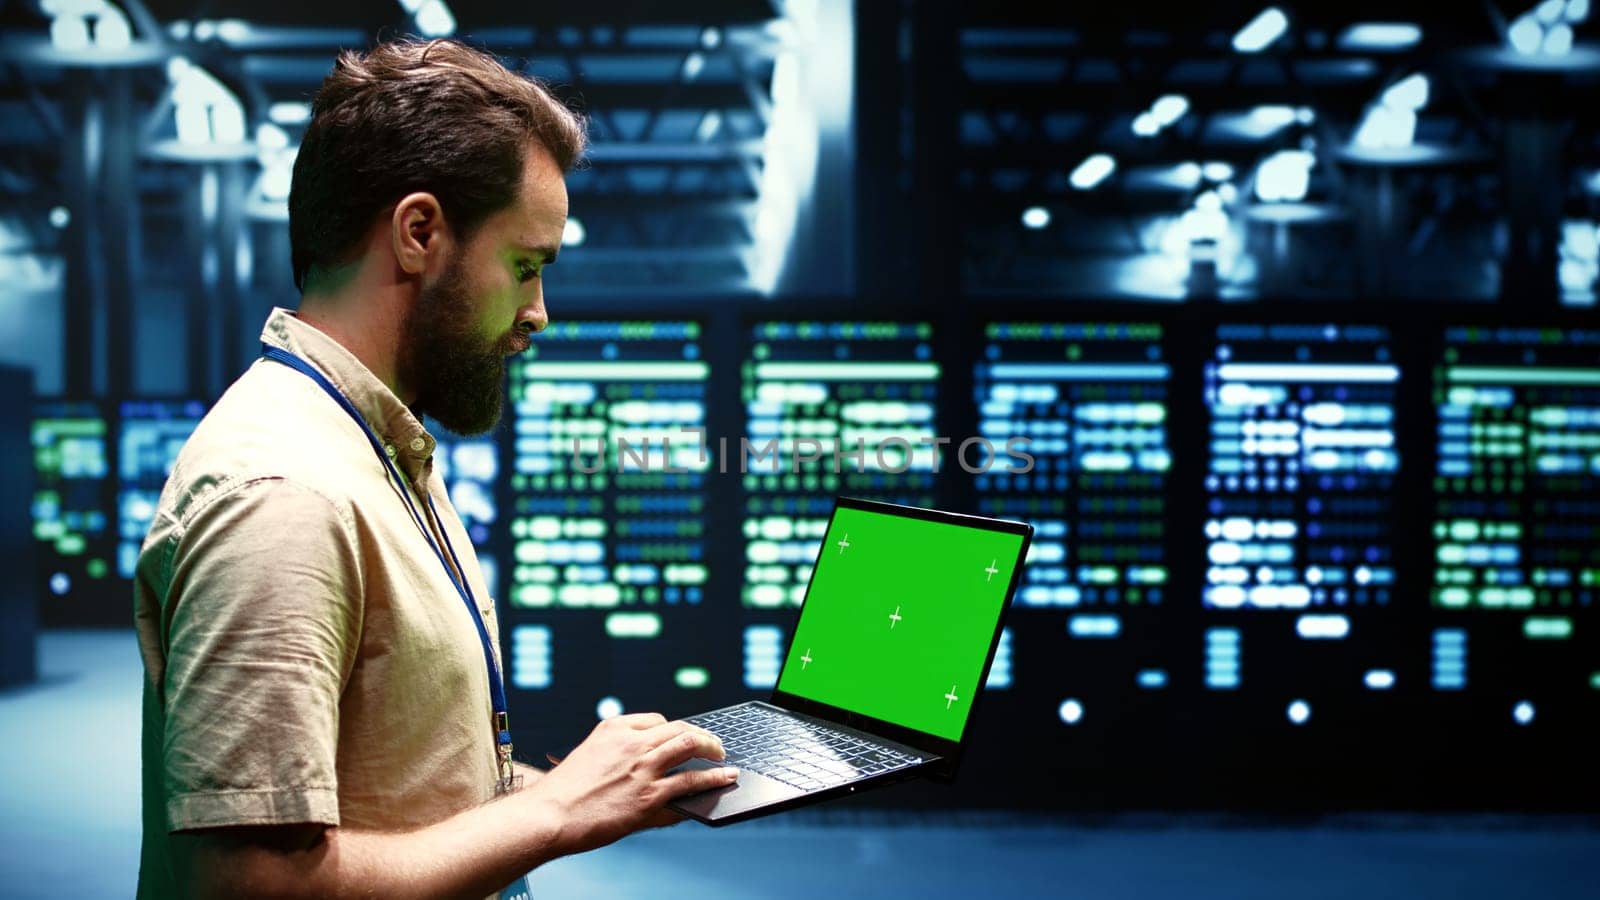 Expert using chroma key laptop to check server hub configuration settings, close up. Mechanic checking event logs in monitoring software to find broken data center components root cause